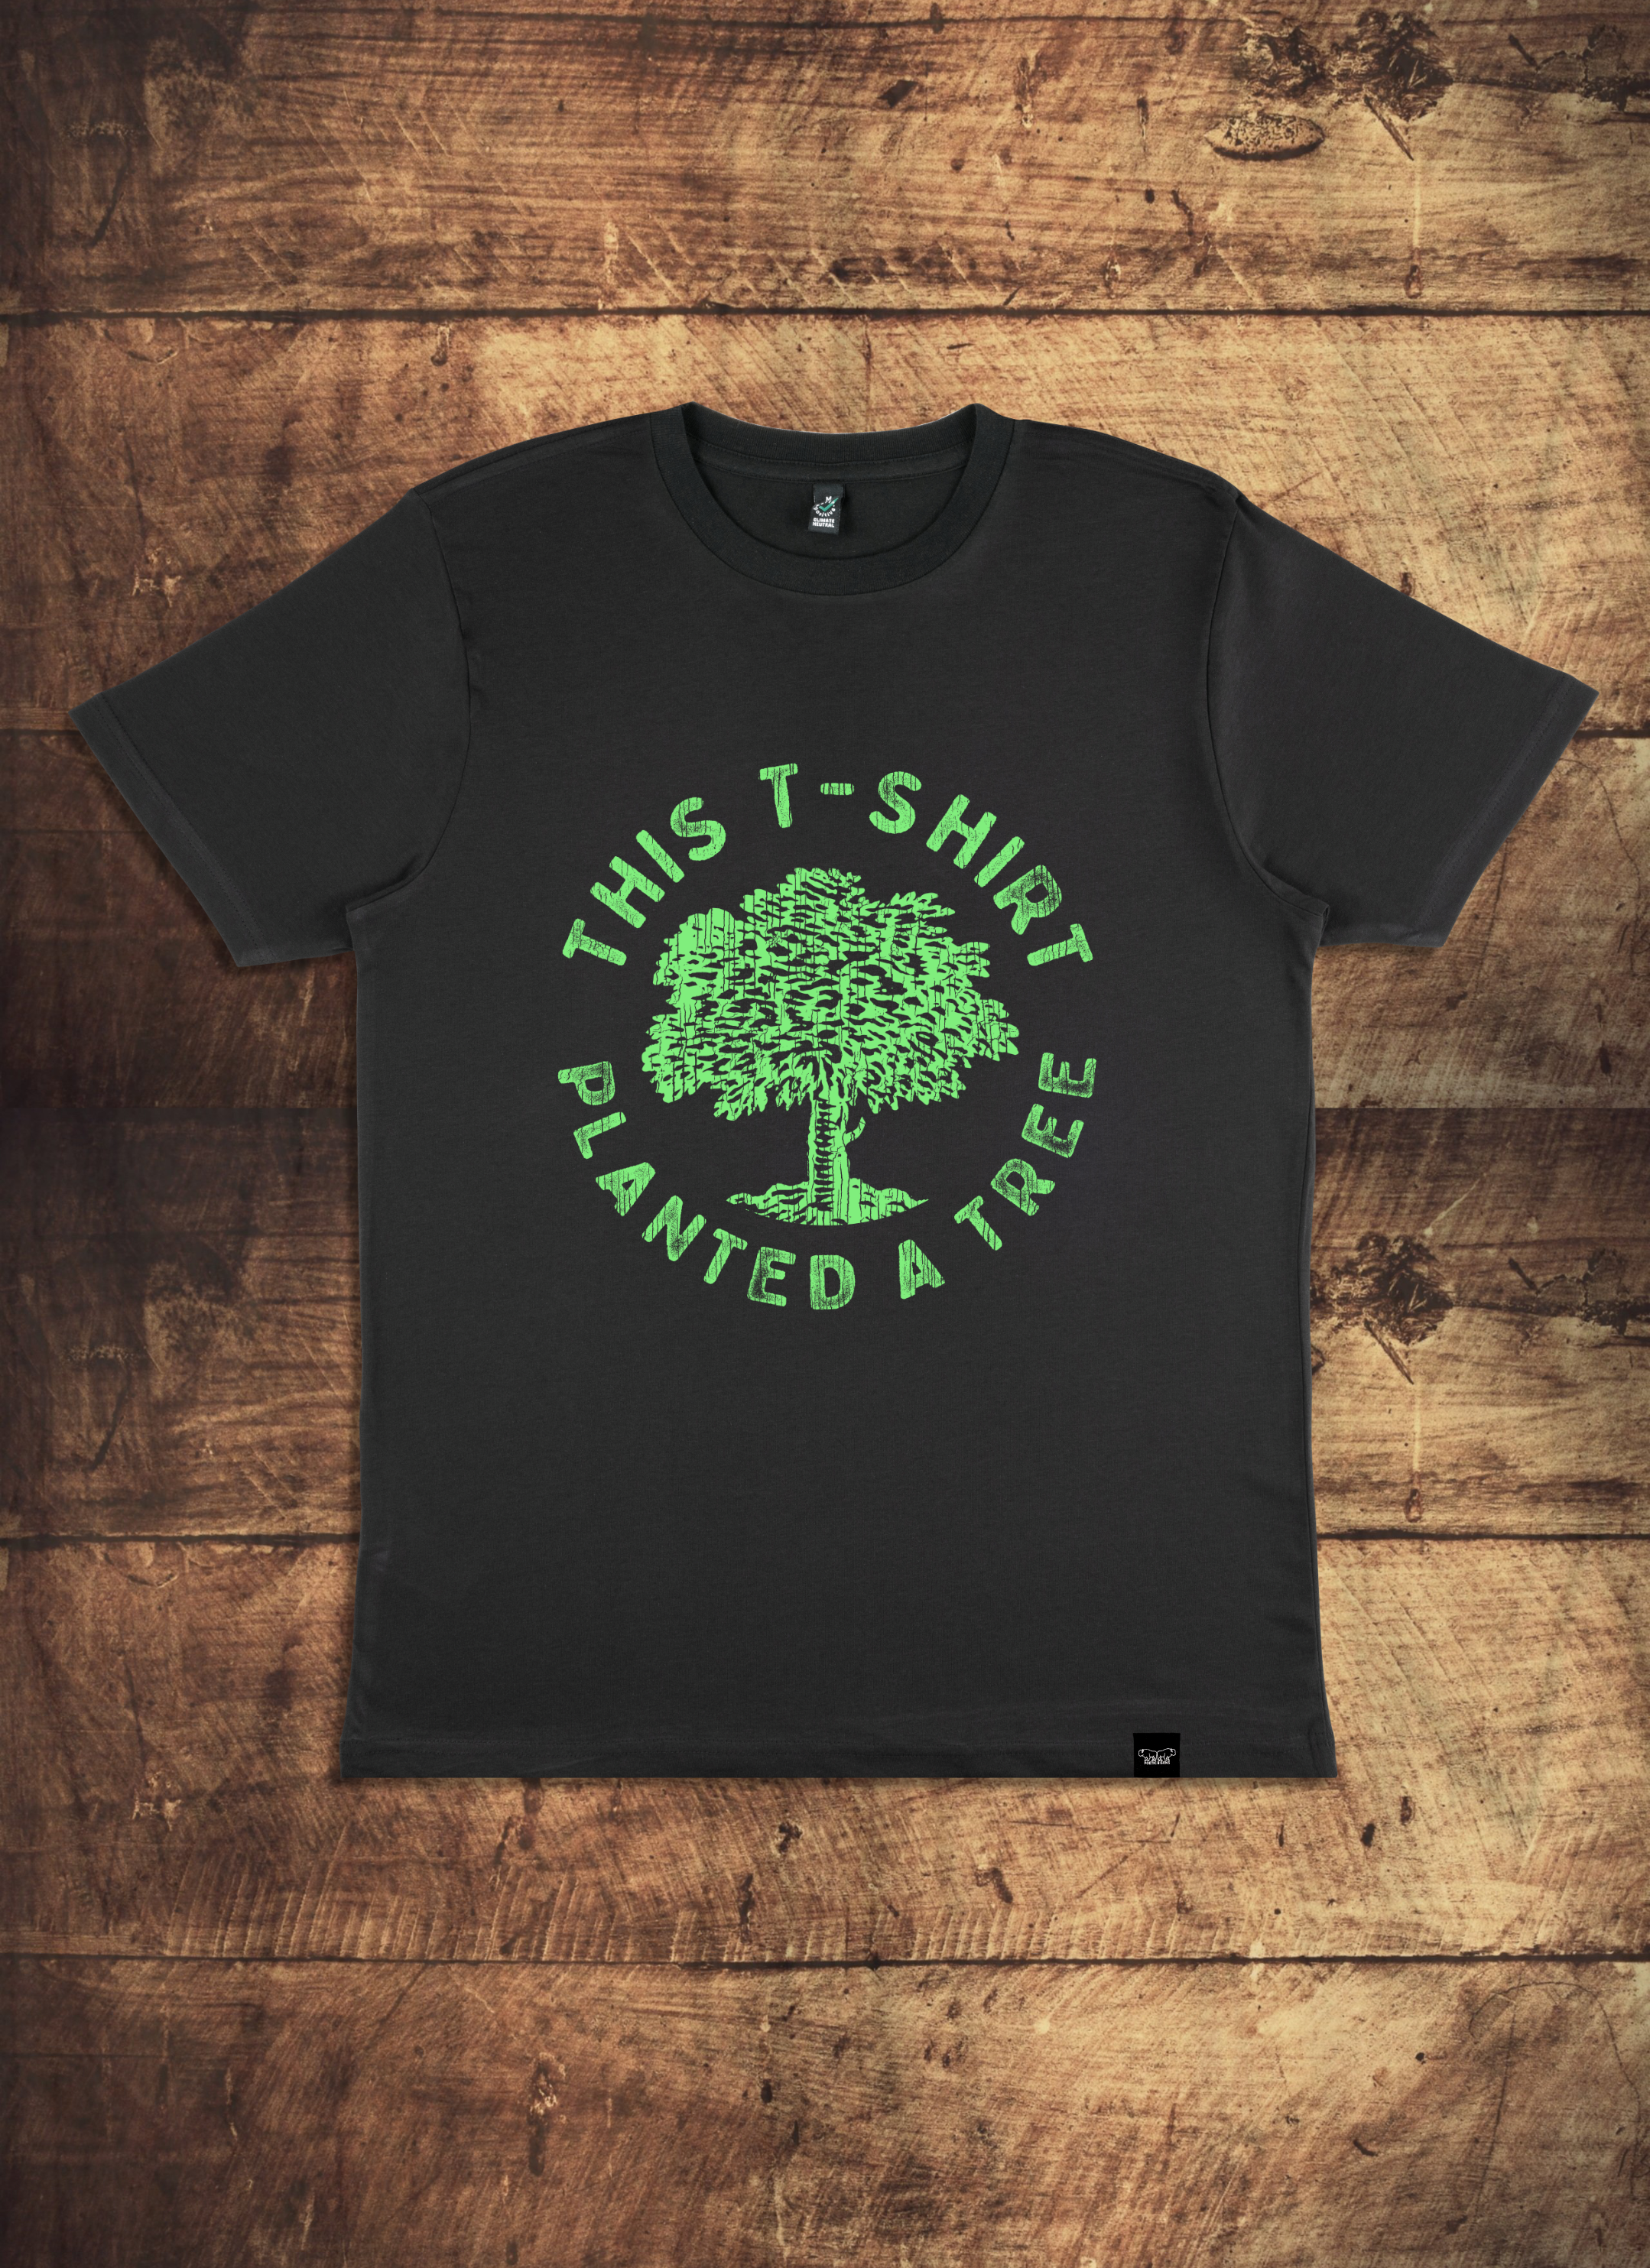 This T-Shirt Planted a Tree